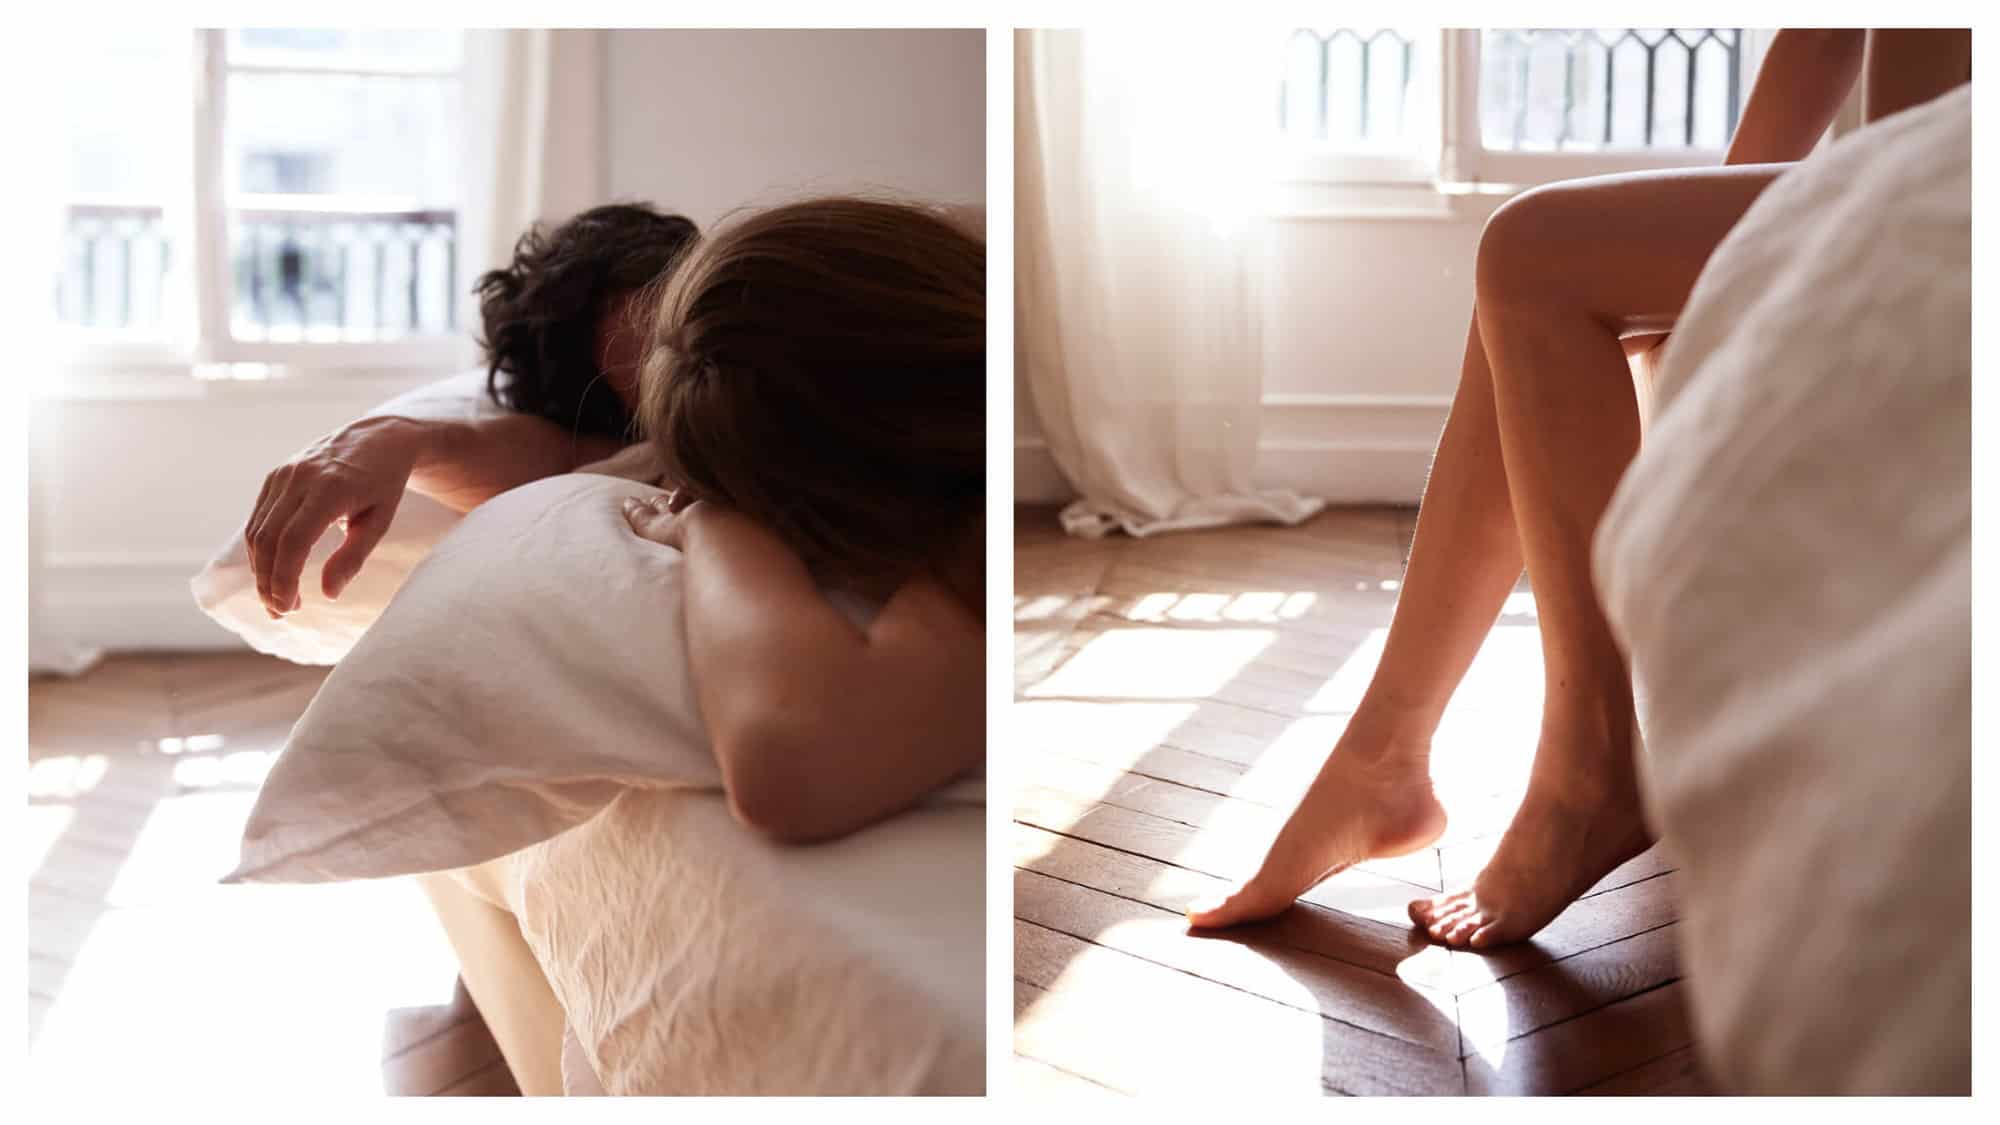 Left: A man and woman are lying on a bed, with only their heads and arms visible. The bedroom is white, with light shining through the large windows behind them. Right: The same bed and room, but a woman's legs are seen hanging off the bed.